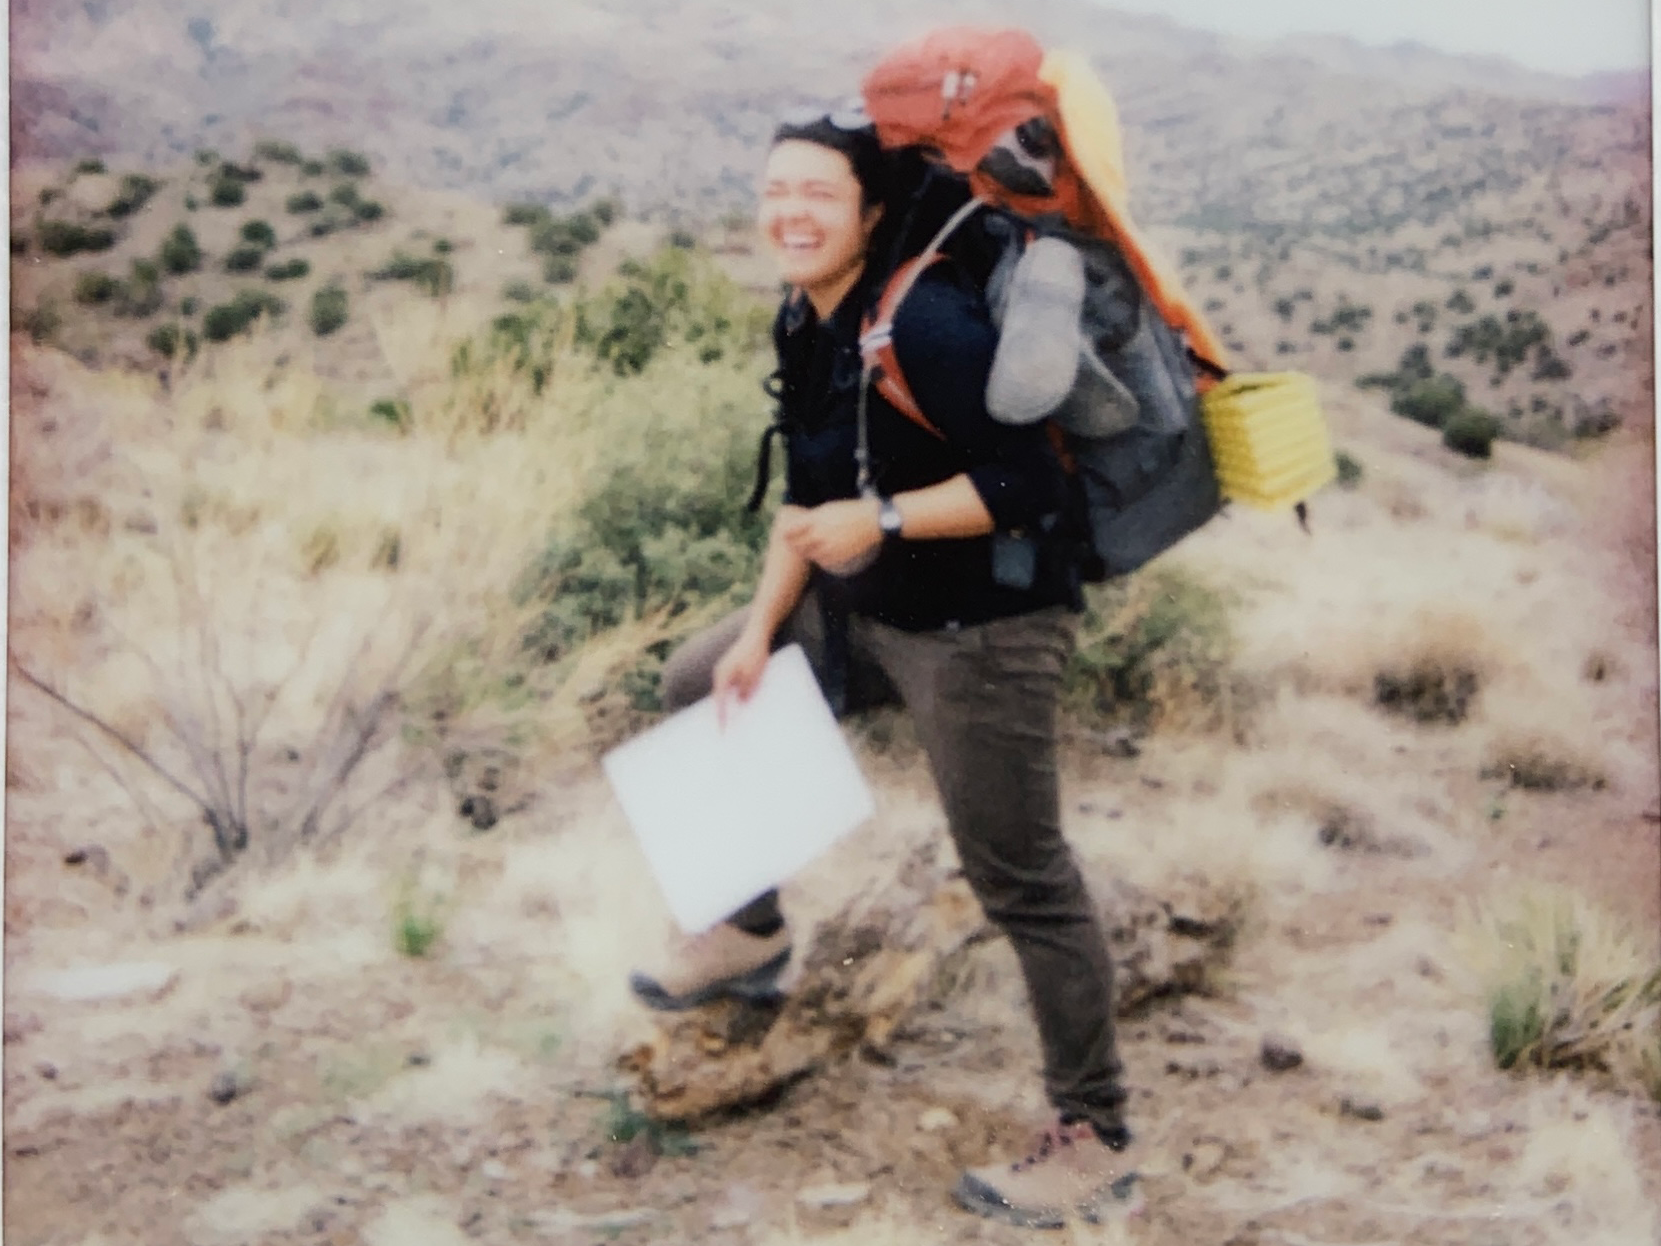 The author smiles carrying her backpack while holding a map to navigate the desert terrain.